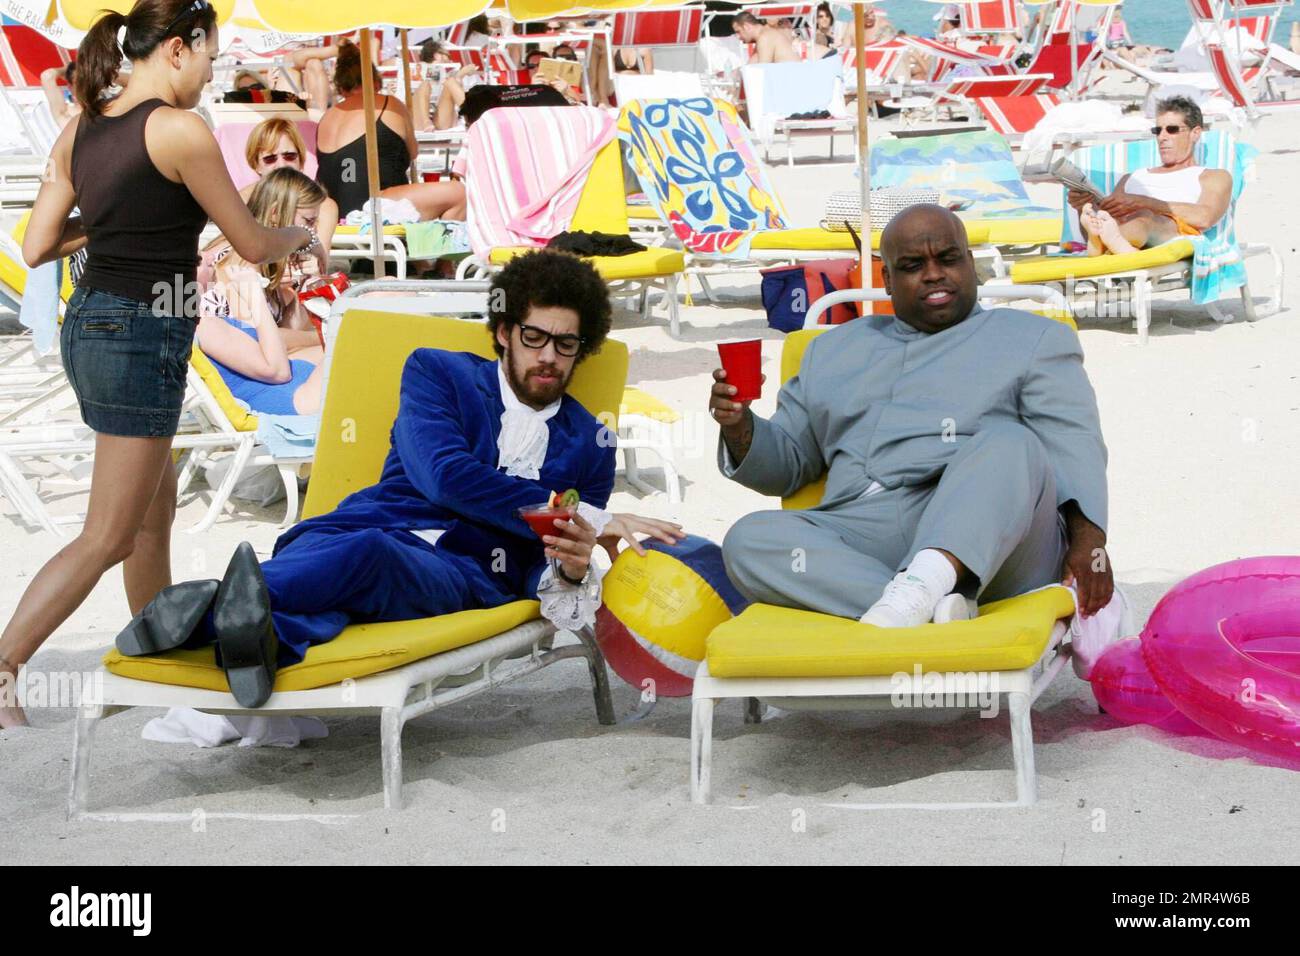 gnarls barkley hit miami beach for a photo shoot the crazy pair posed as austin powers and dr evil while sipping cocktails and playing with beach toys before heading off to play at miamis all day bang festival 111106 2MR4W6B